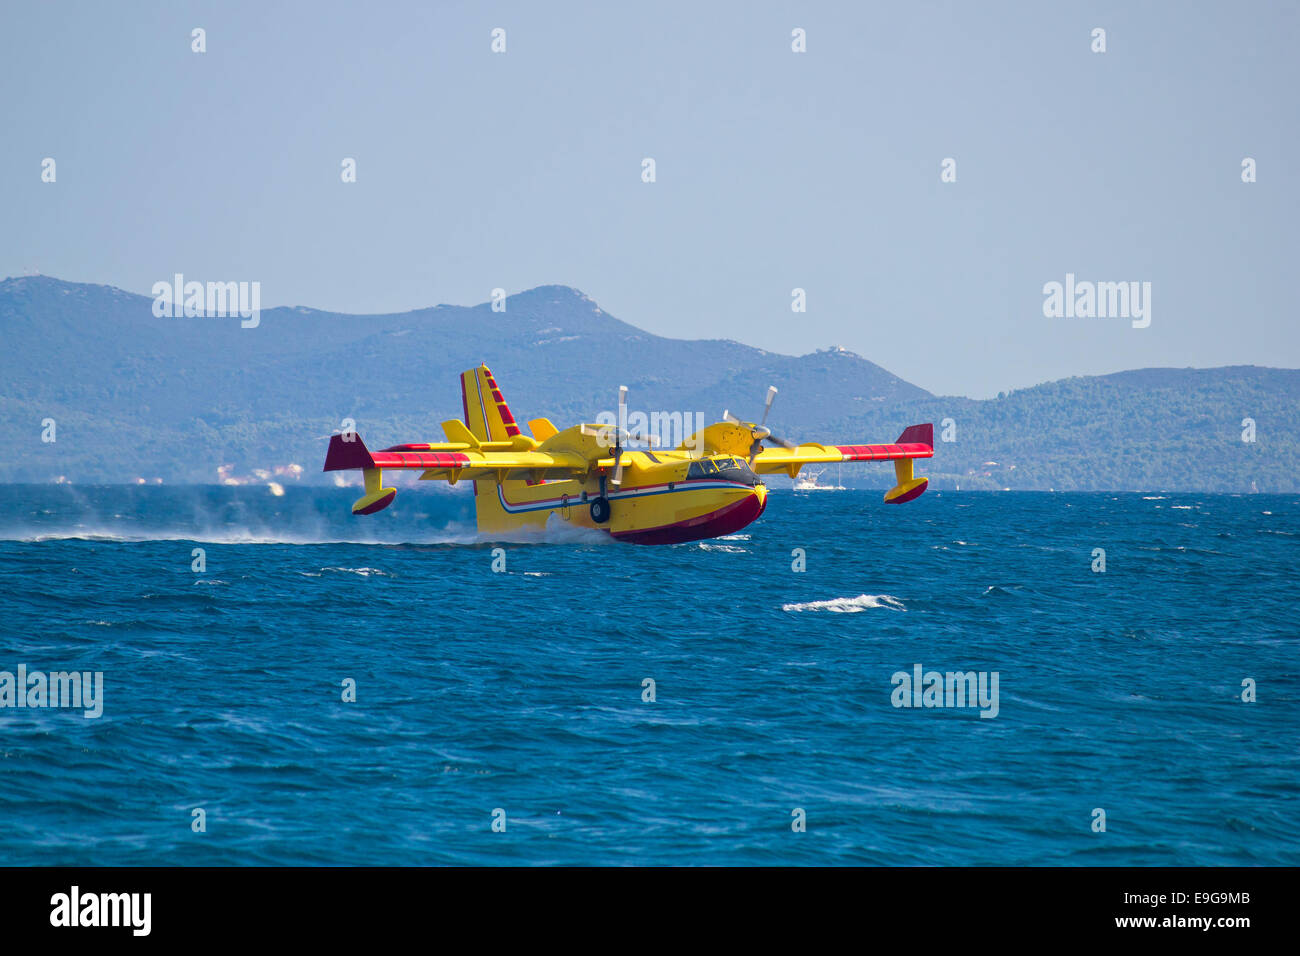 Firefighting airplane taking water from sea Stock Photo